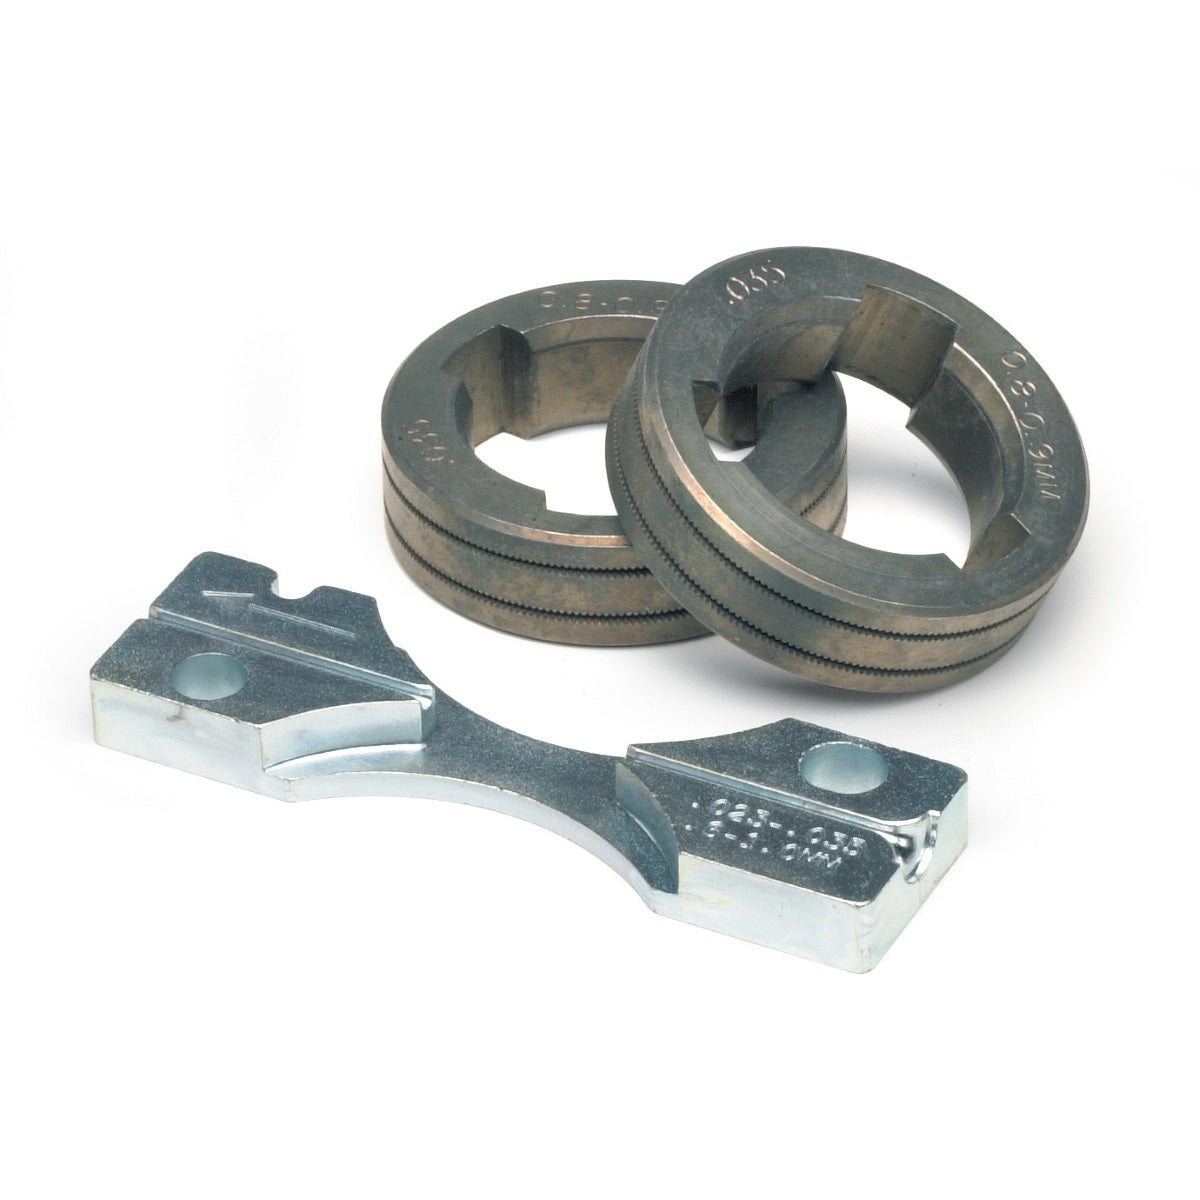 Lincoln KP1697 Drive Rolls for Flux Cored Wire (KP1697-XXC)